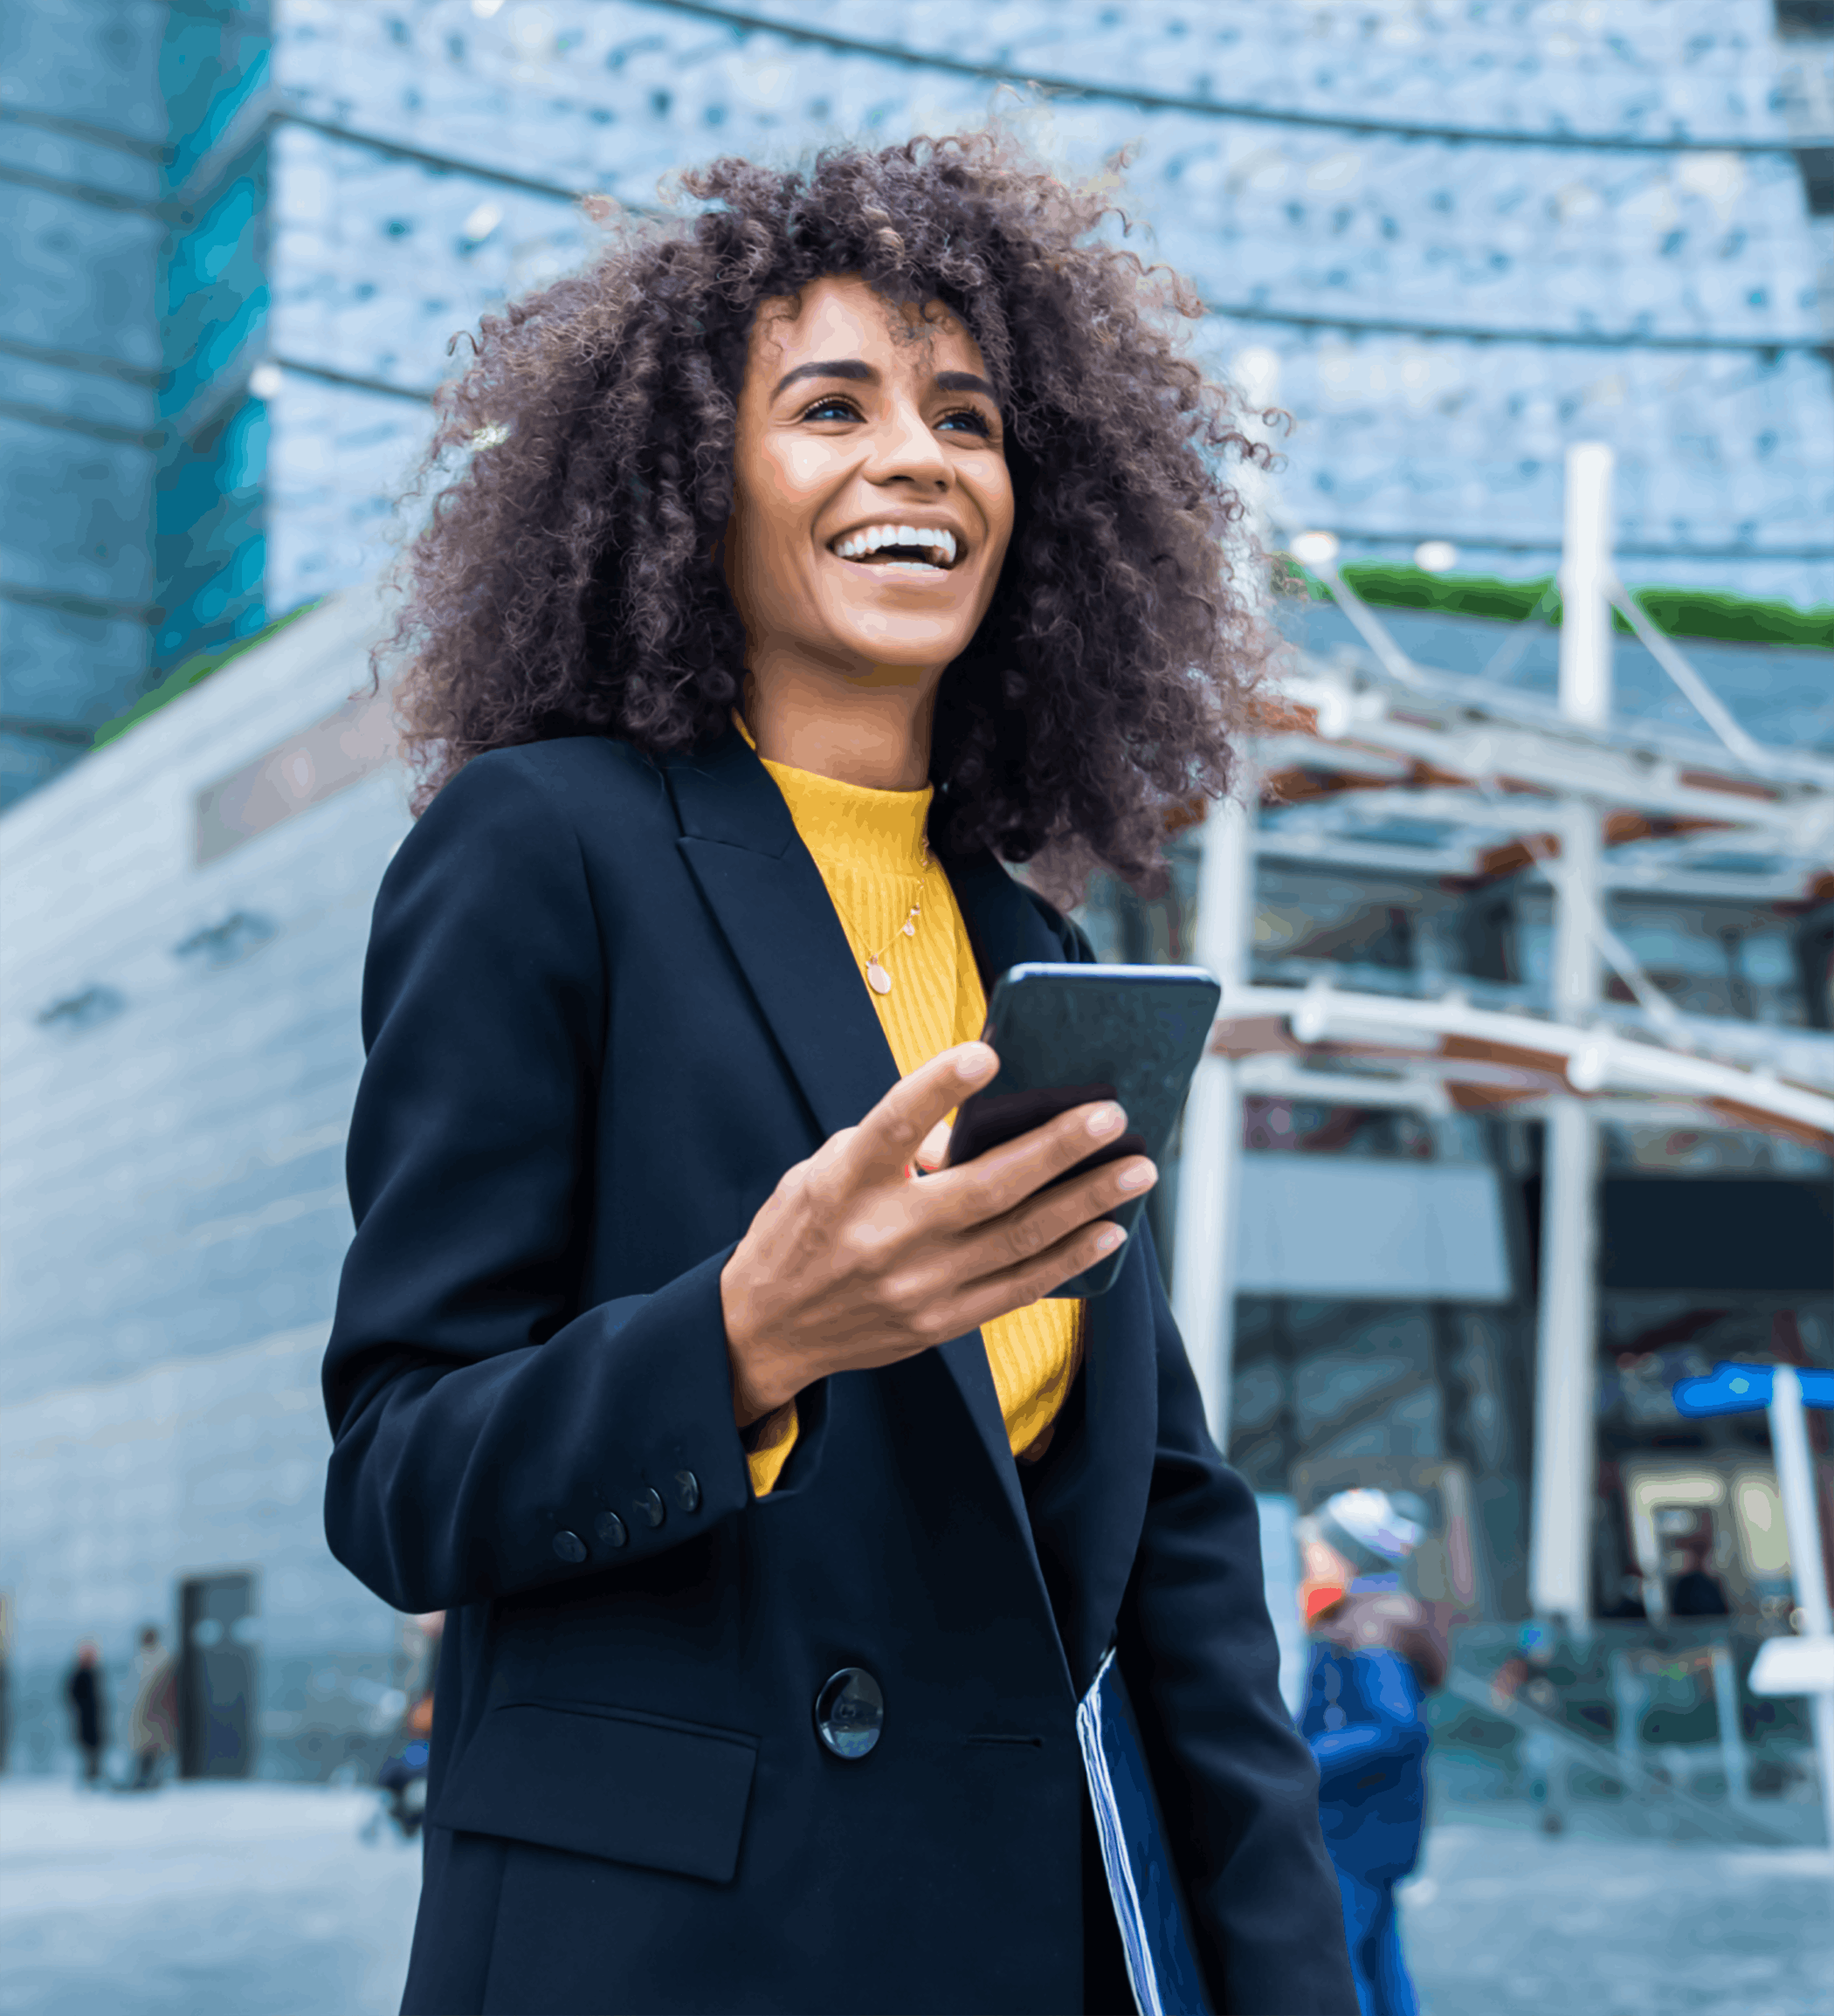 woman smiling outside while holding phone